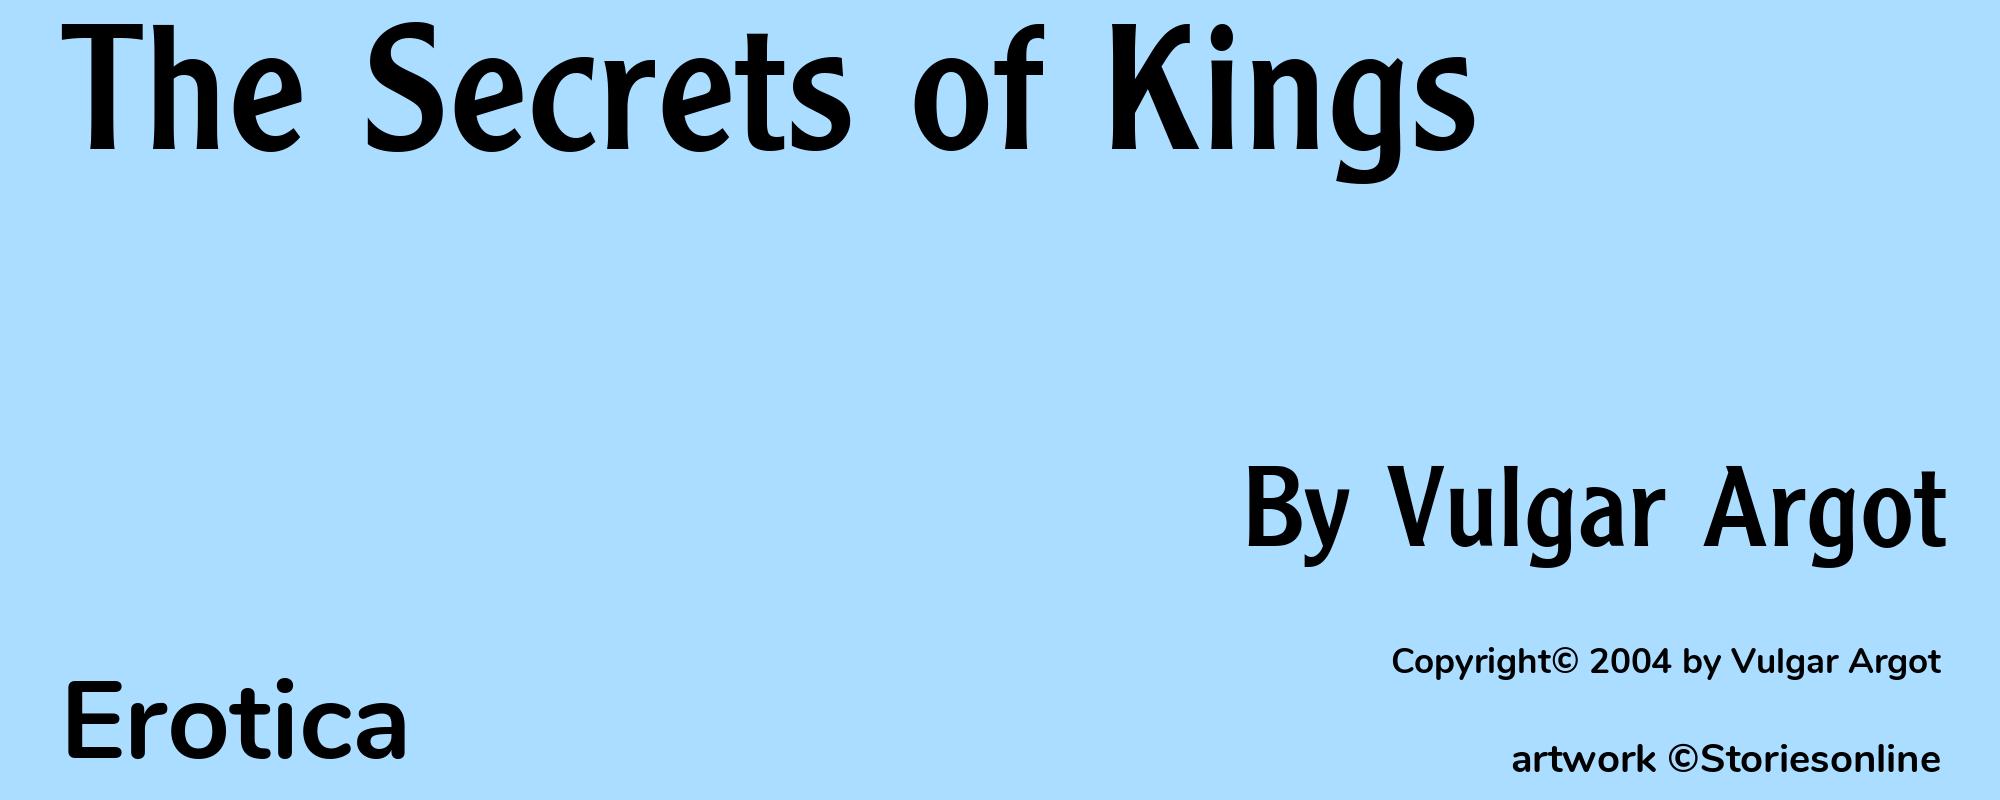 The Secrets of Kings - Cover